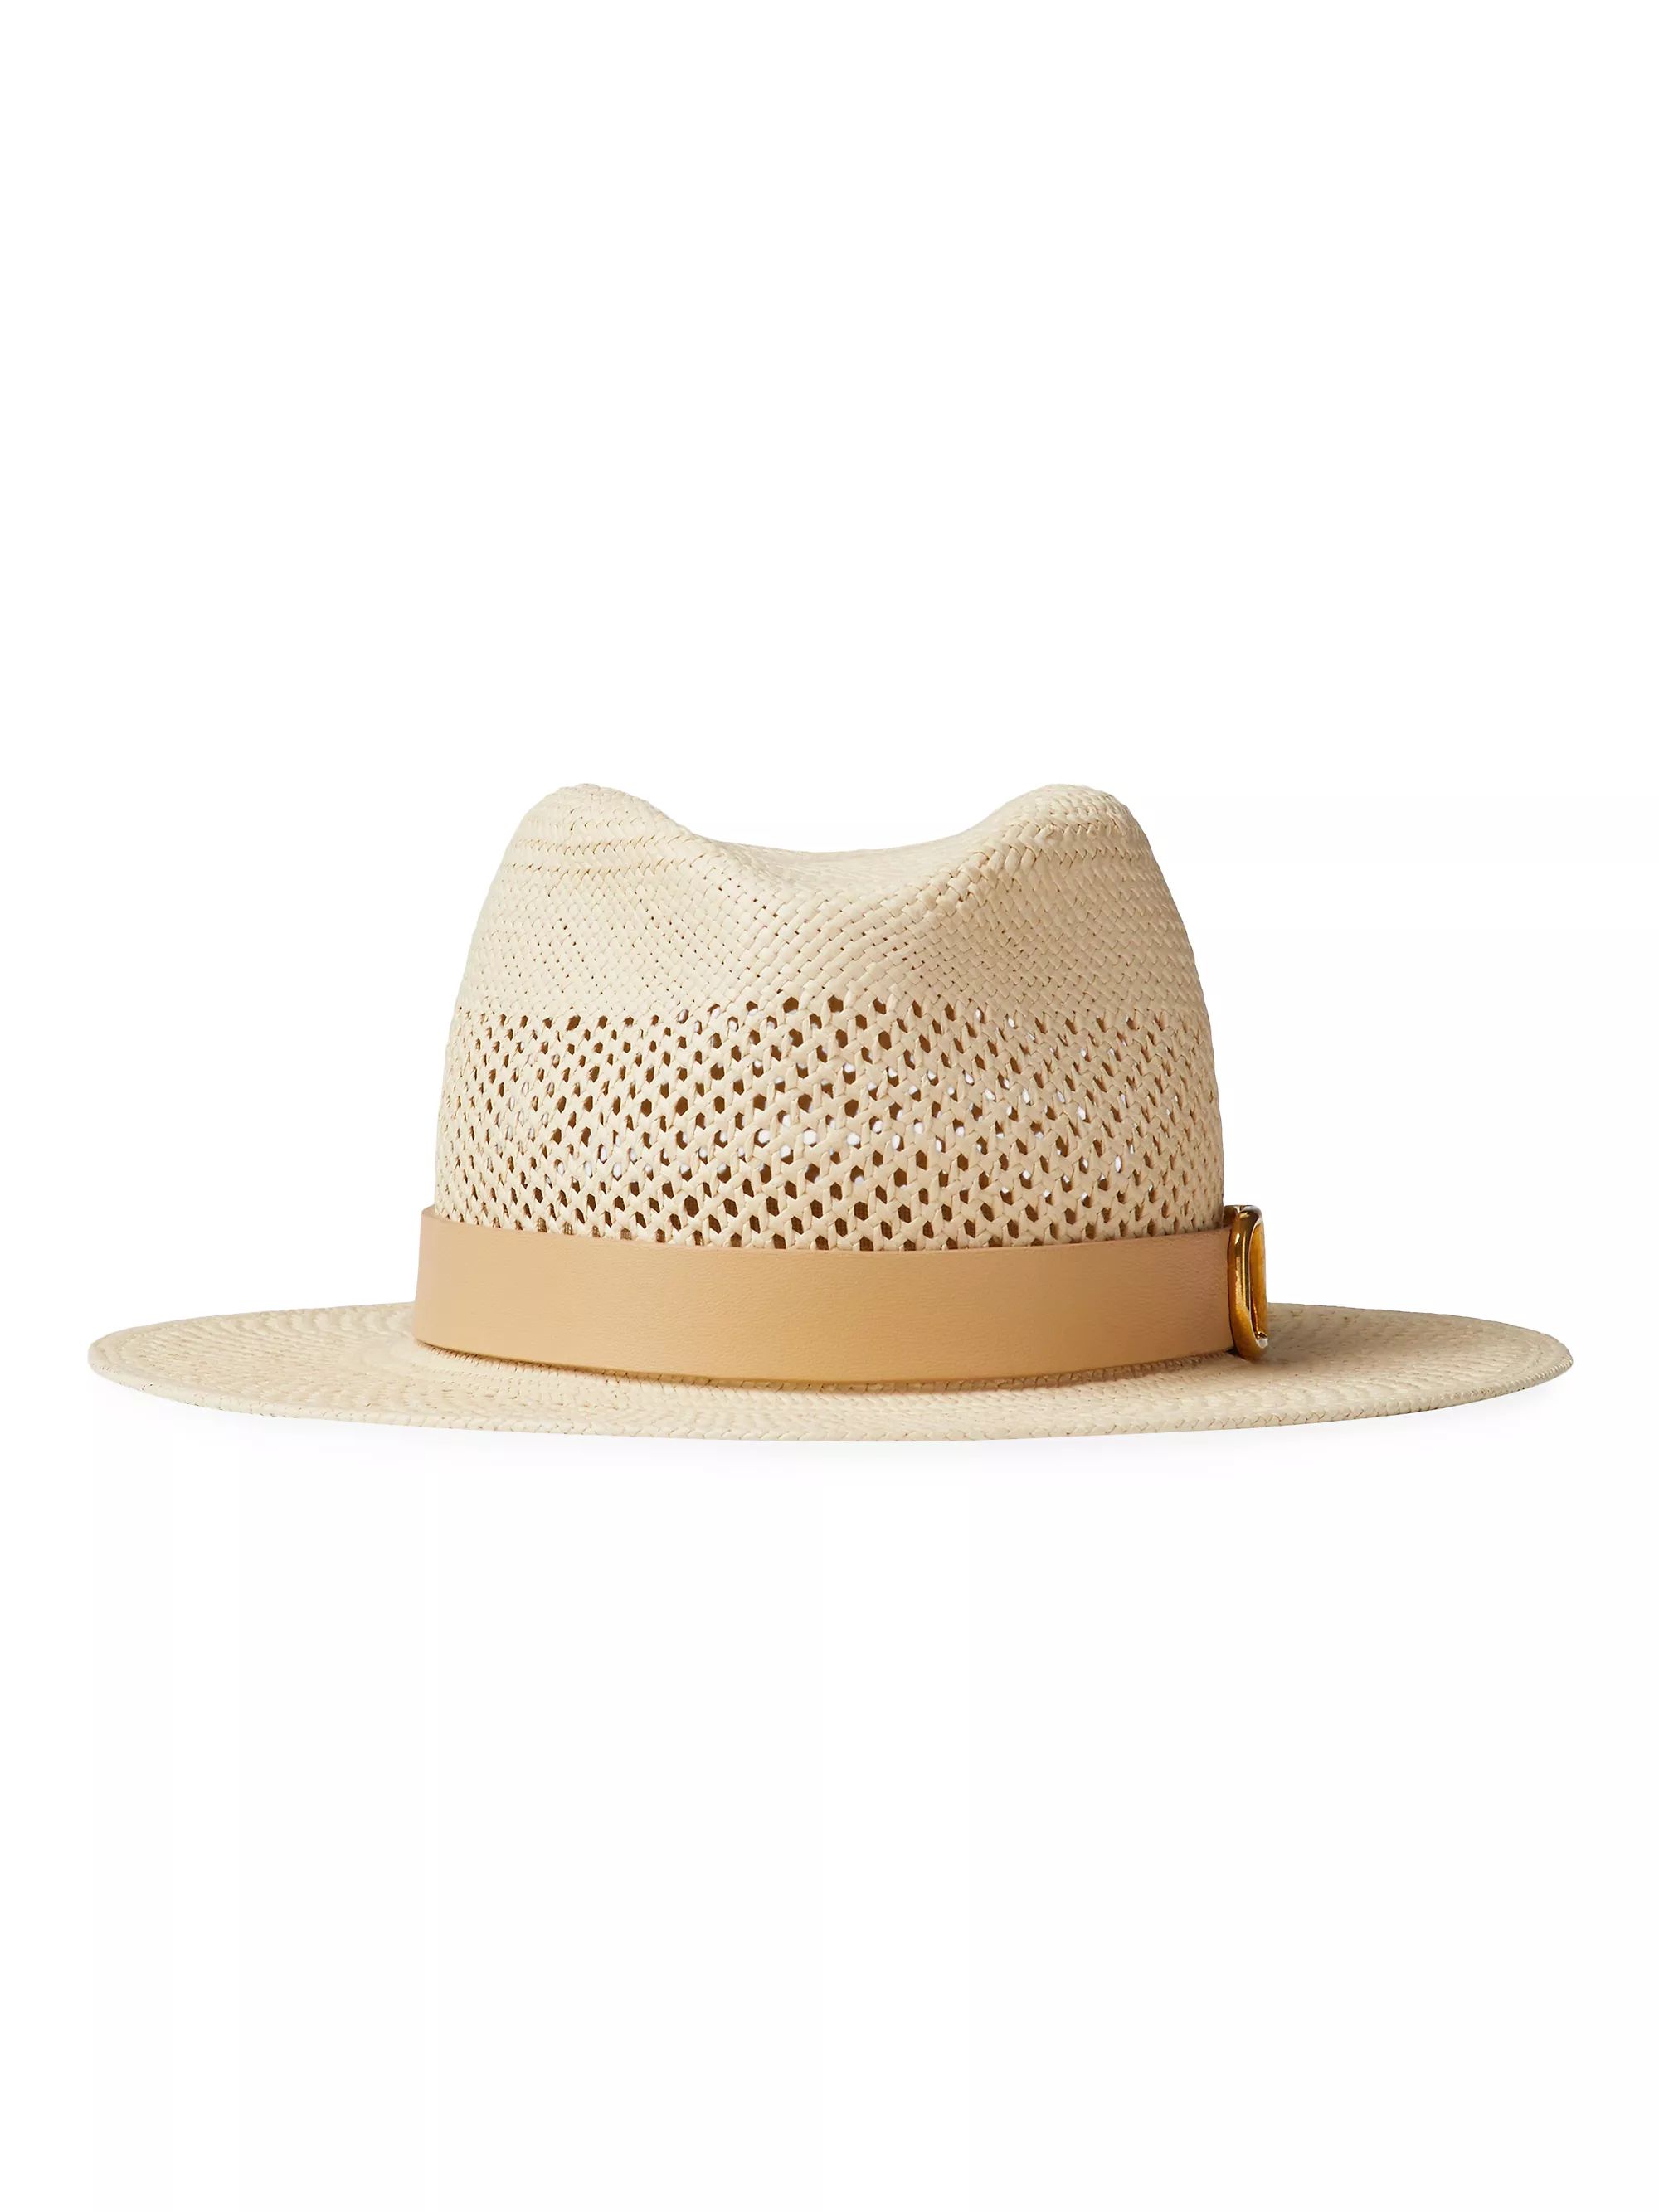 Textile Paper And Leather Vlogo Signature Fedora Hat | Saks Fifth Avenue